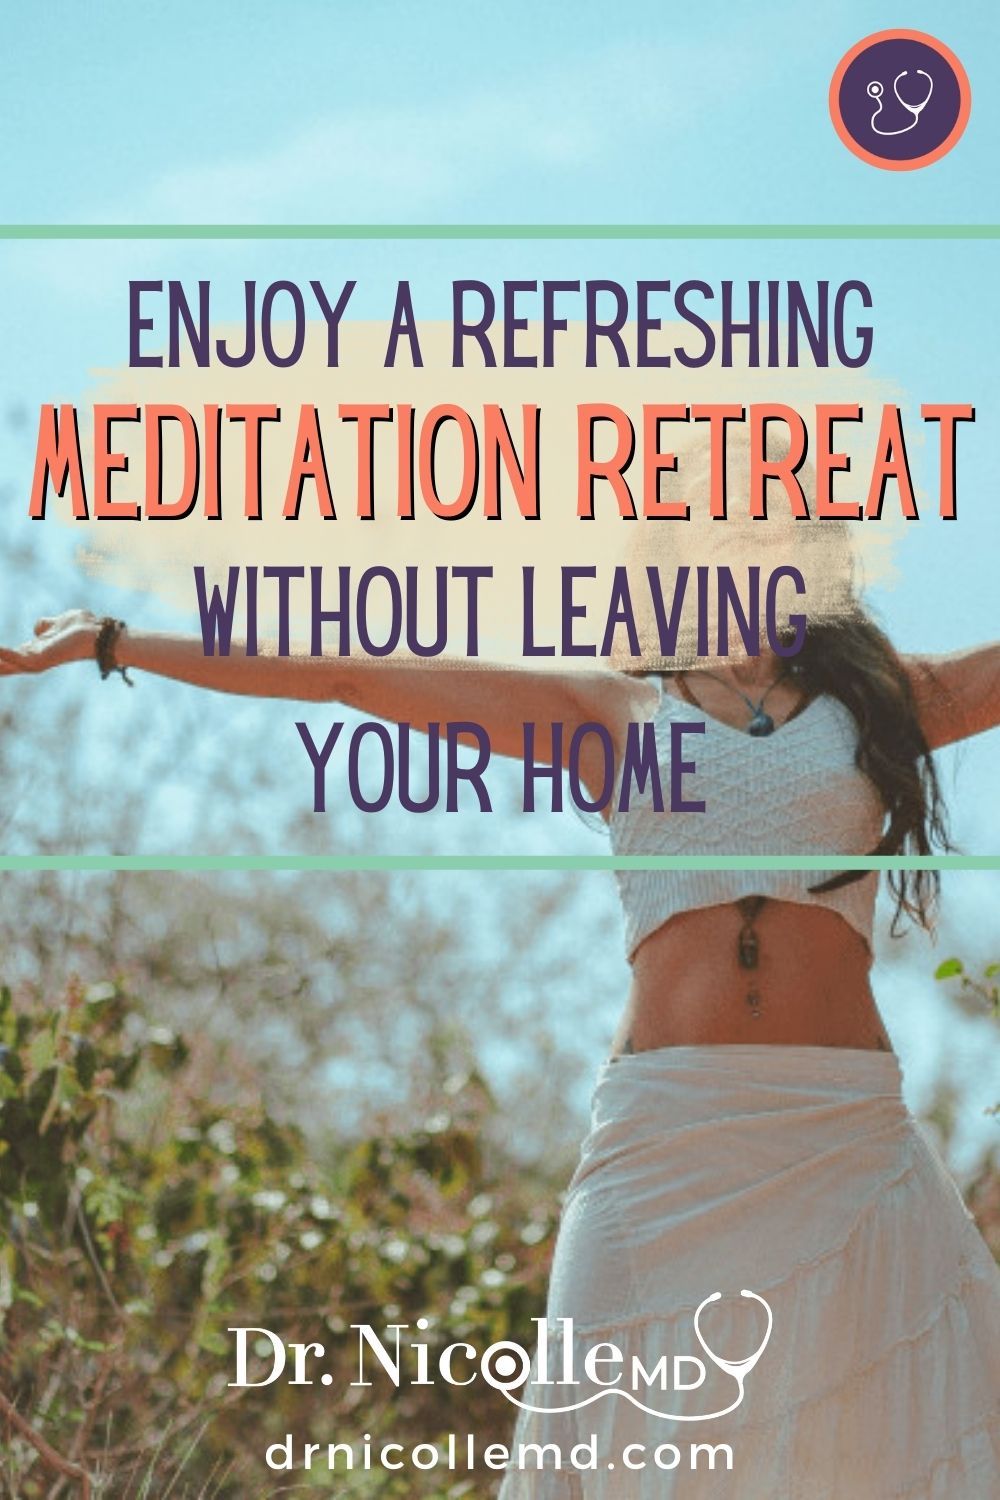 Enjoy A Refreshing Meditation Retreat Without Leaving Your Home